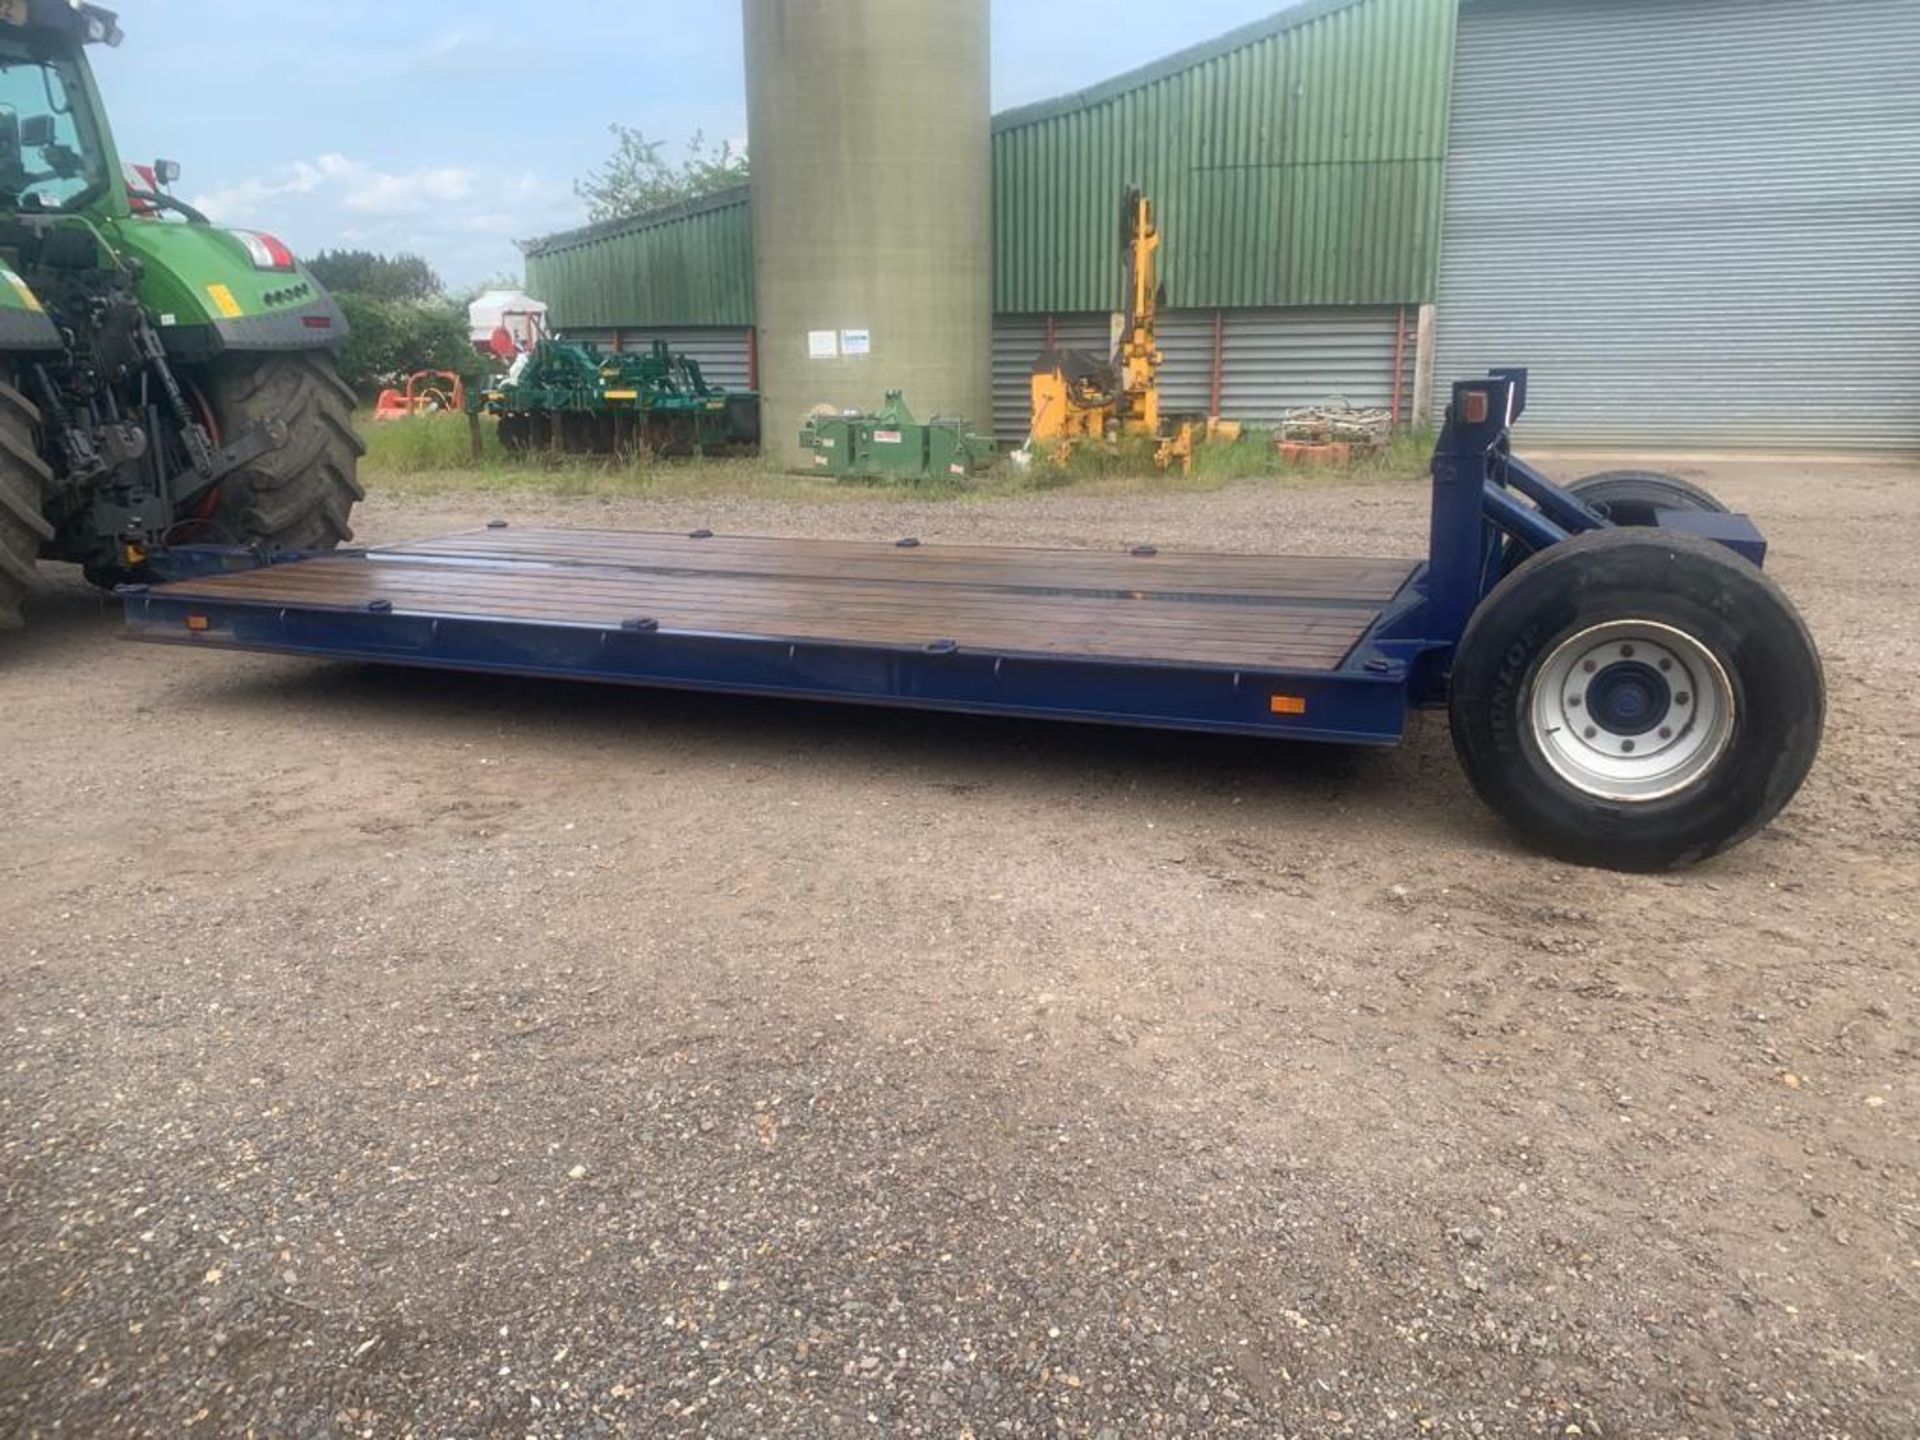 8t drop deck low loader with lights, hydraulic brakes and storage box 5.25m x 2.40m - Image 2 of 7